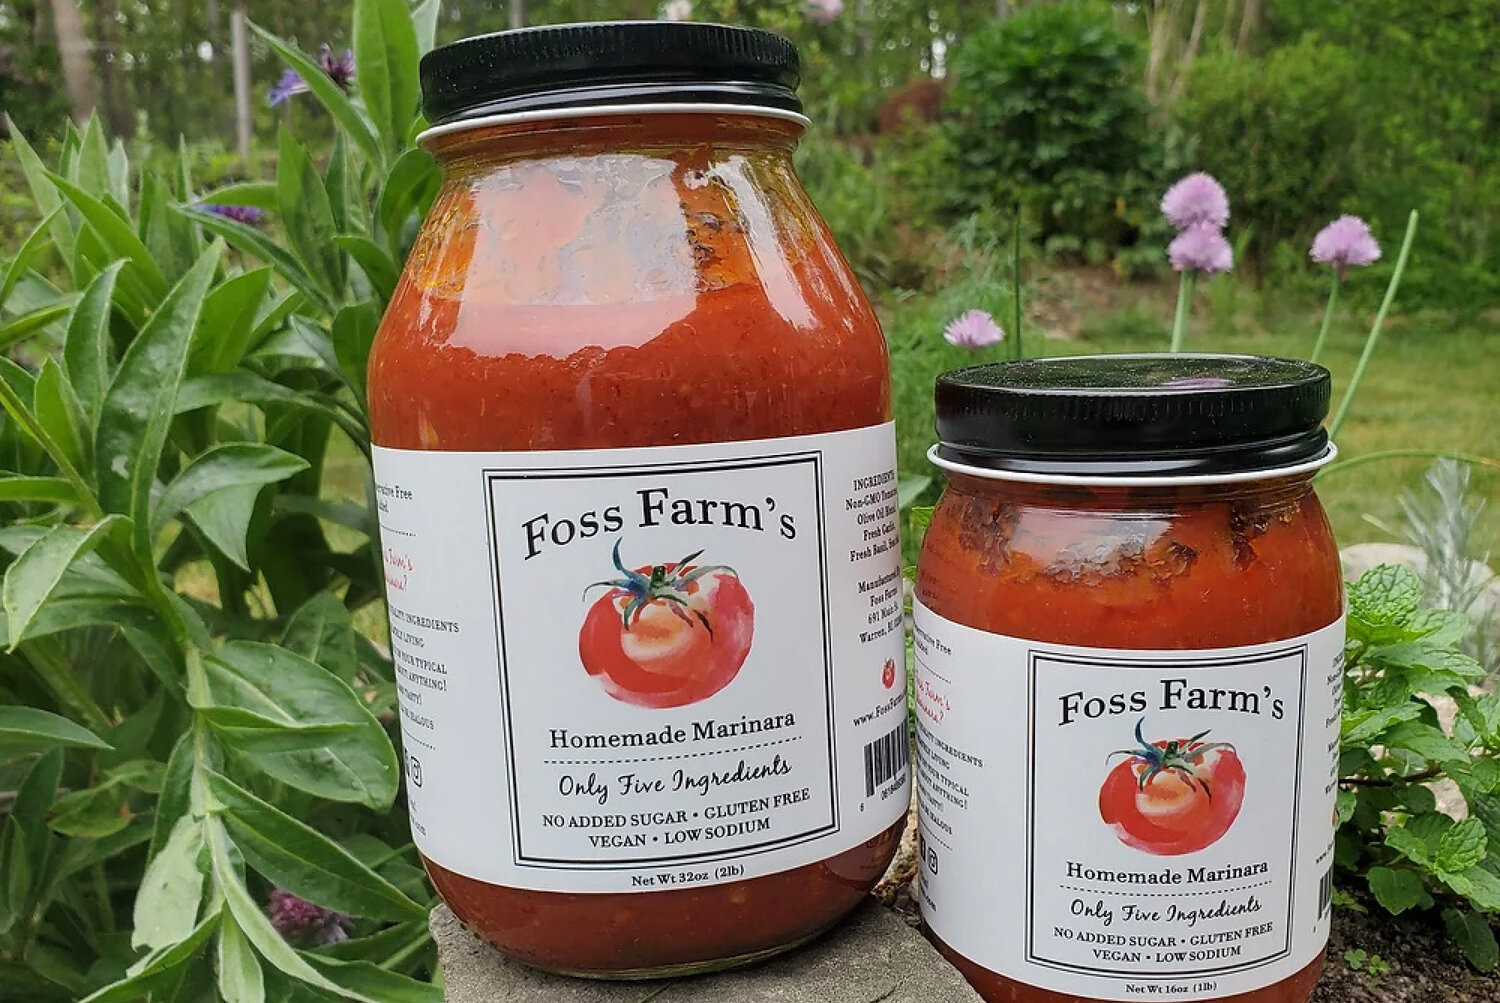 Foss Farm’s sauce can be found at 30+ retailers